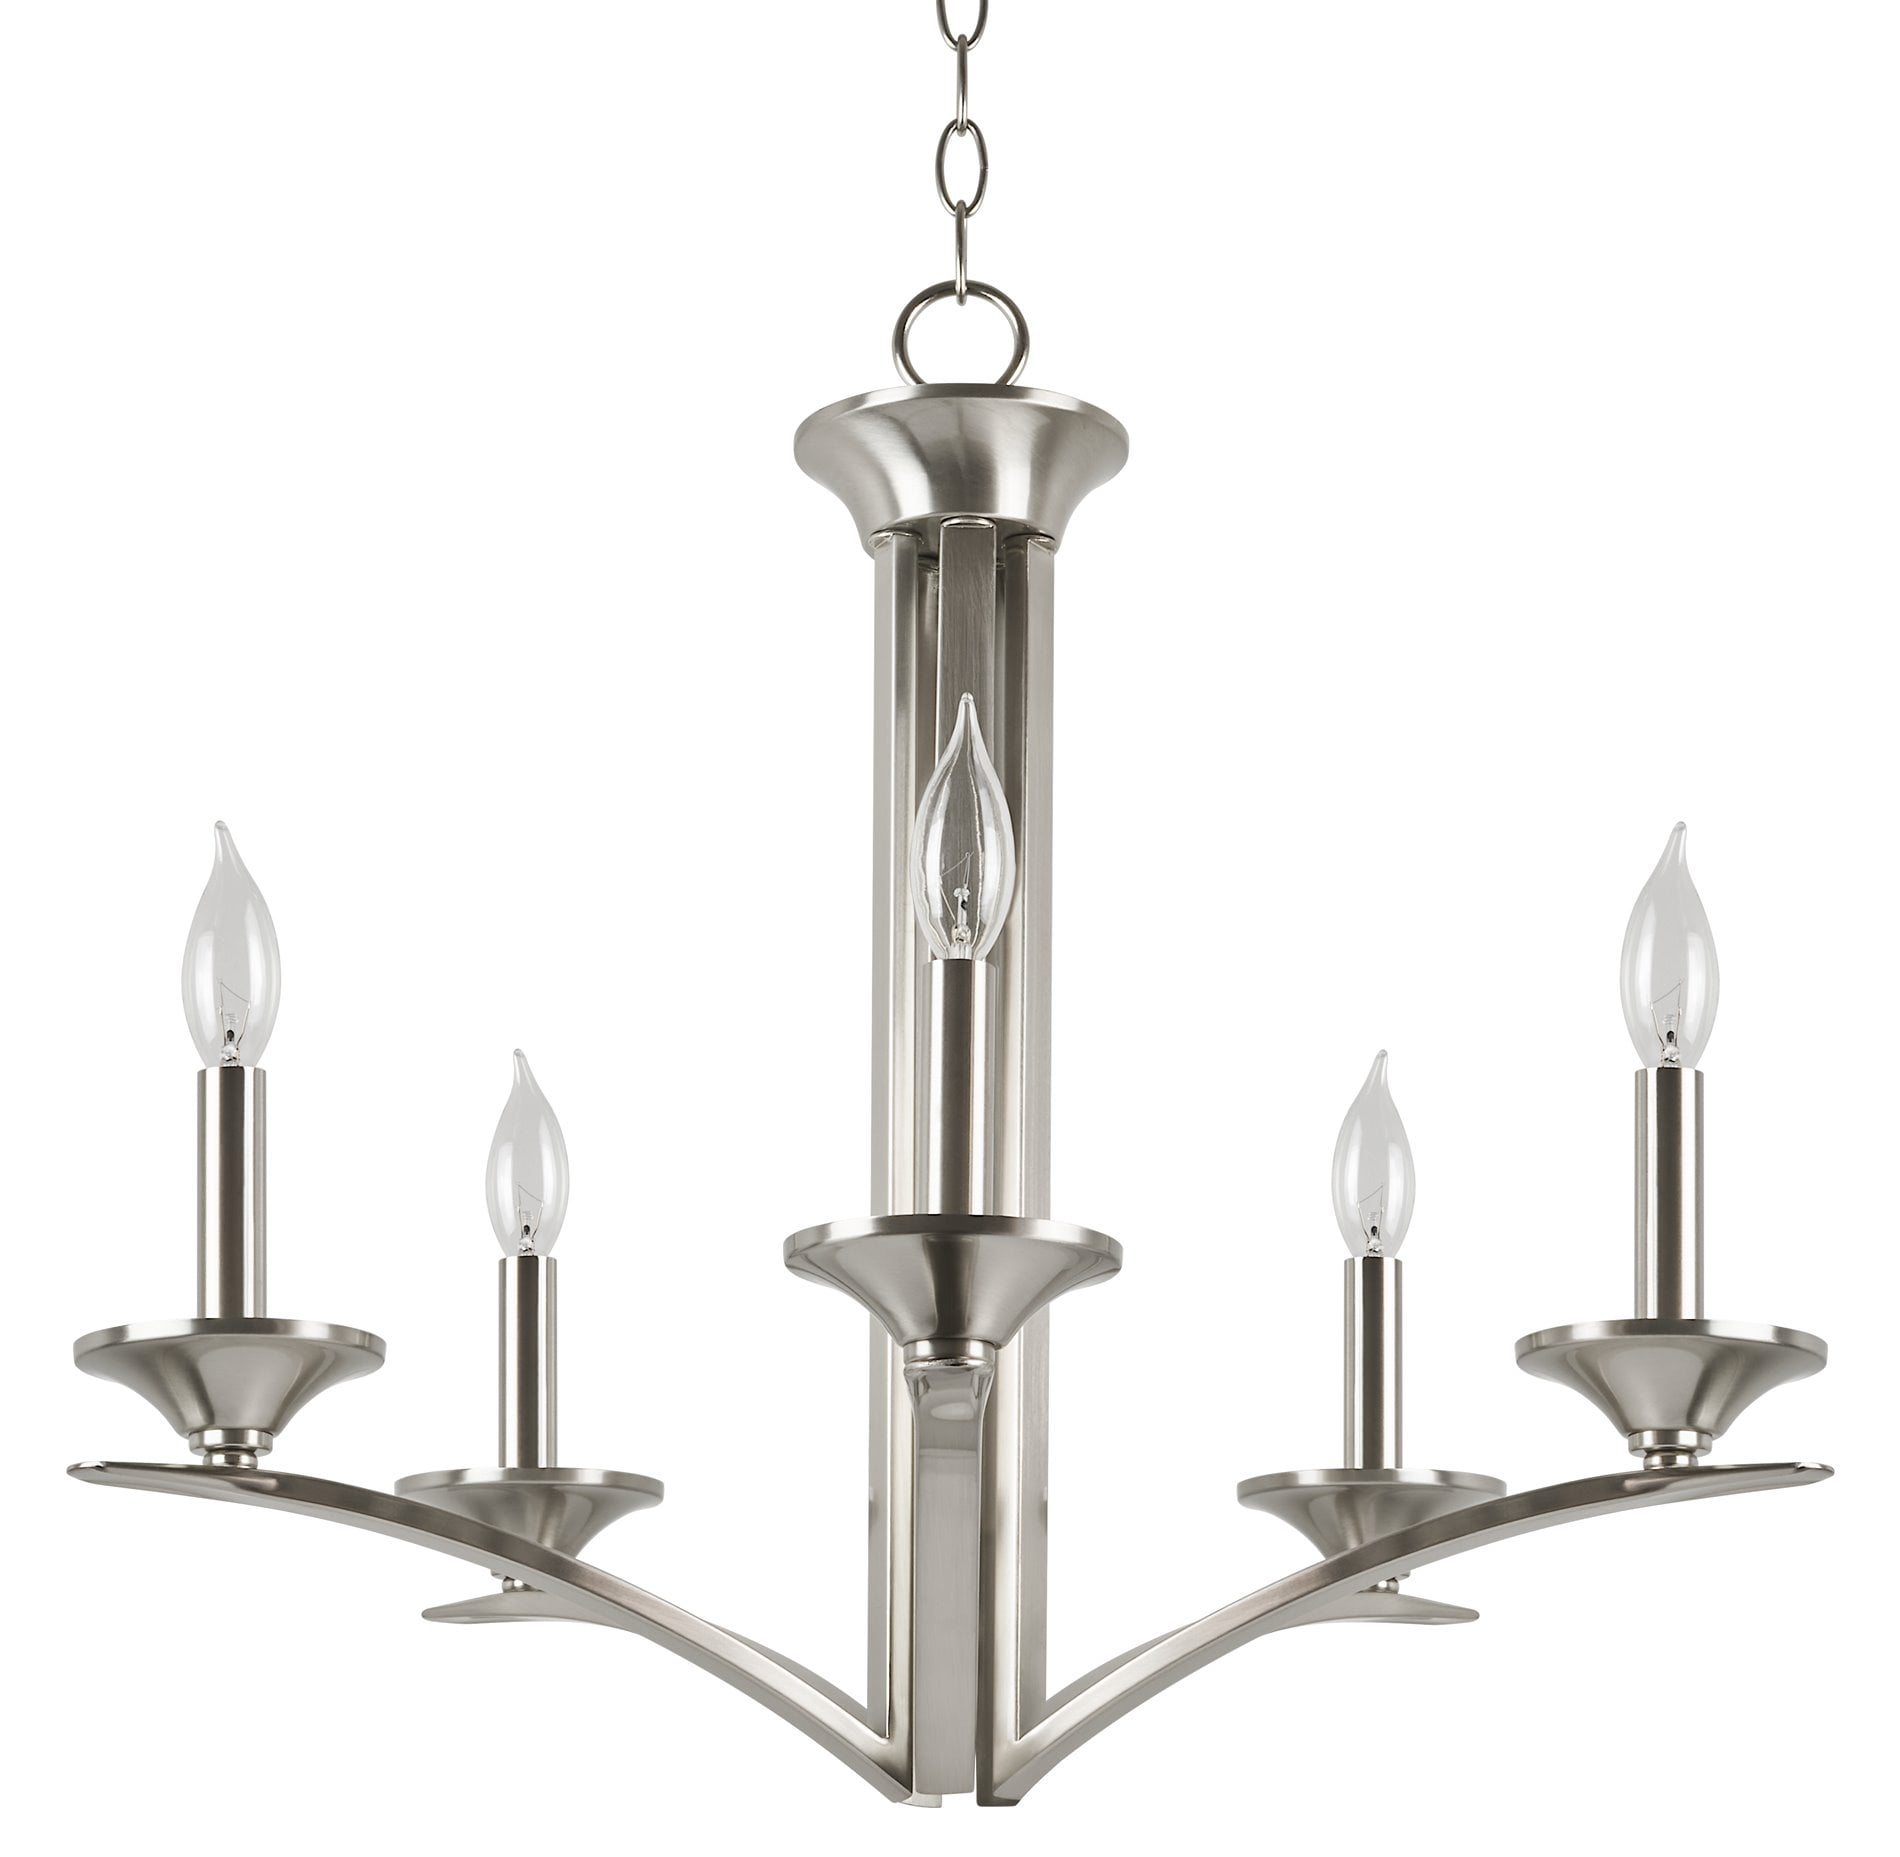 5-Light Hanging Fixture in Brushed Nickel Finish 